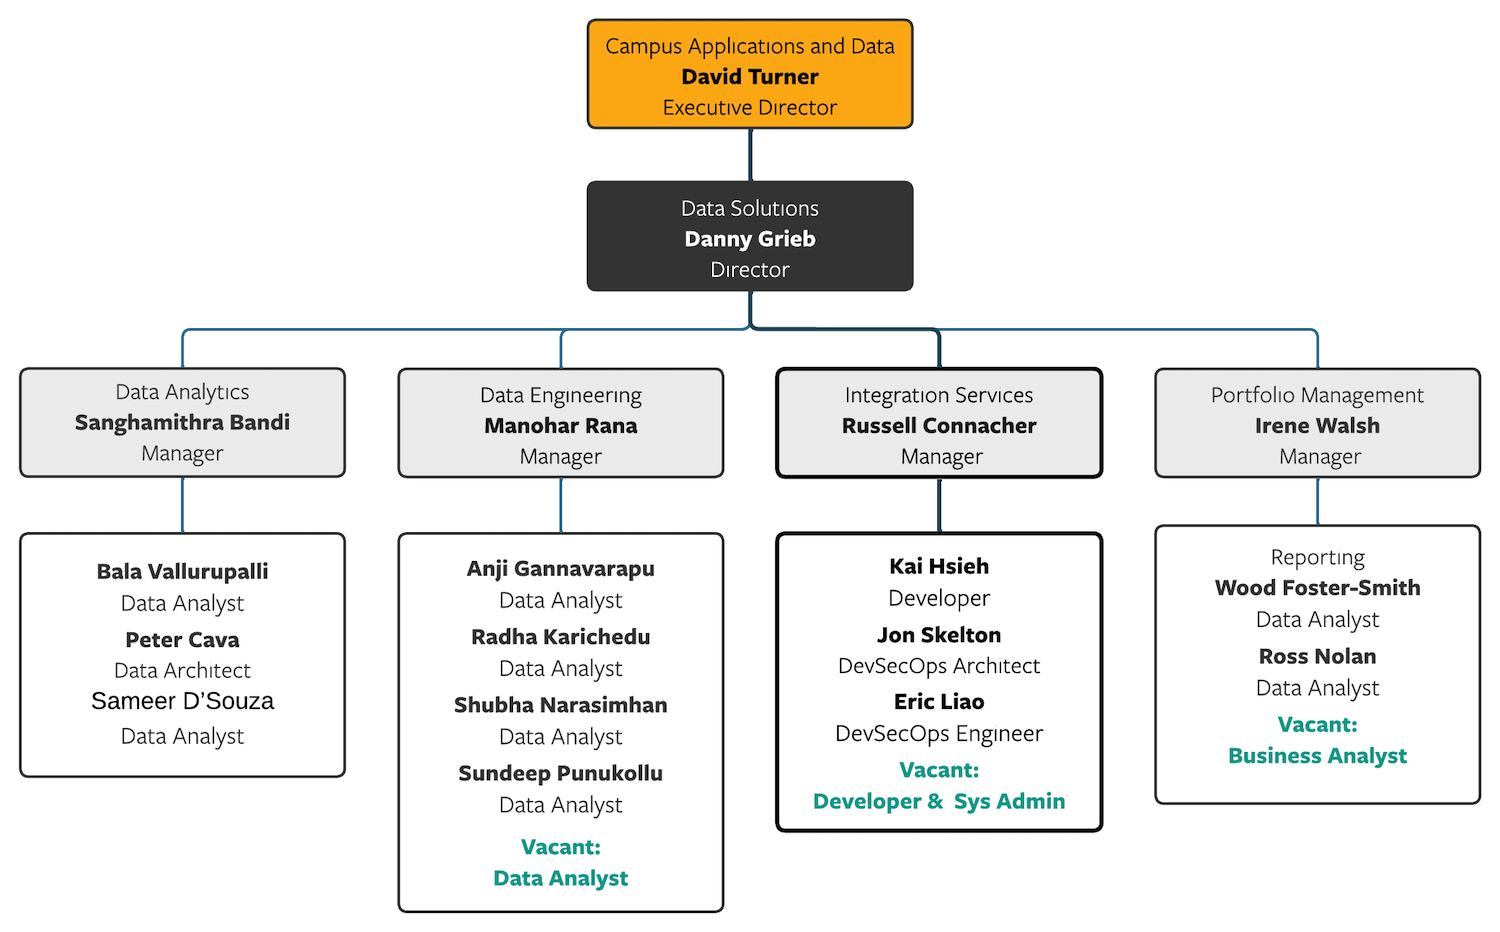 Organization chart for Integration Services, showing other Data Solutions teams